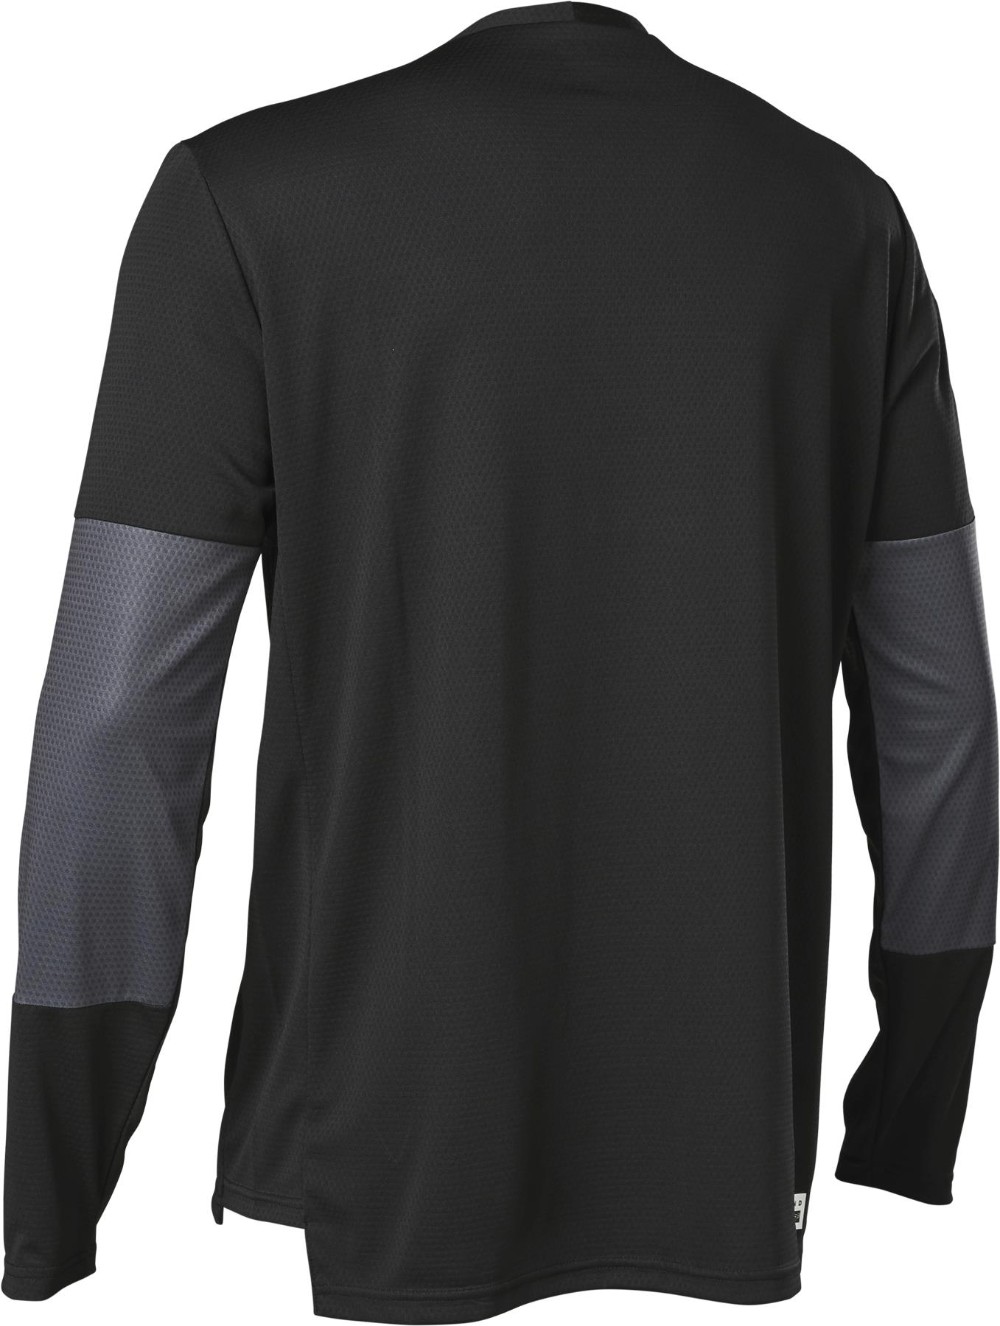 Defend Foxhead Long Sleeve MTB Cycling Jersey image 1